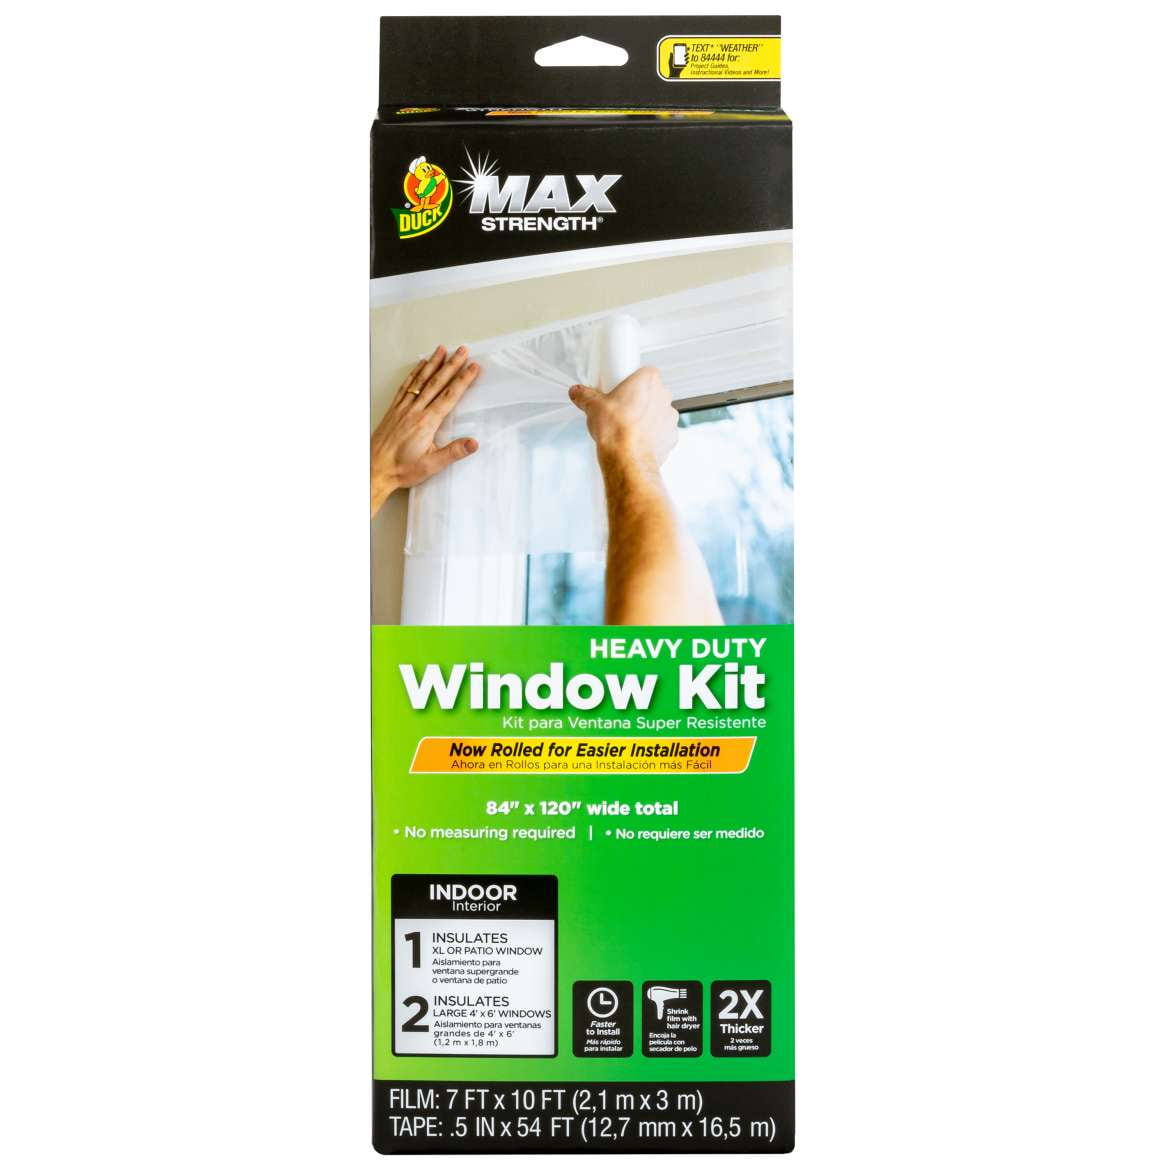 Duck Max Strength Rolled Window Insulation Kit, Clear, 84 in. x 120 in.